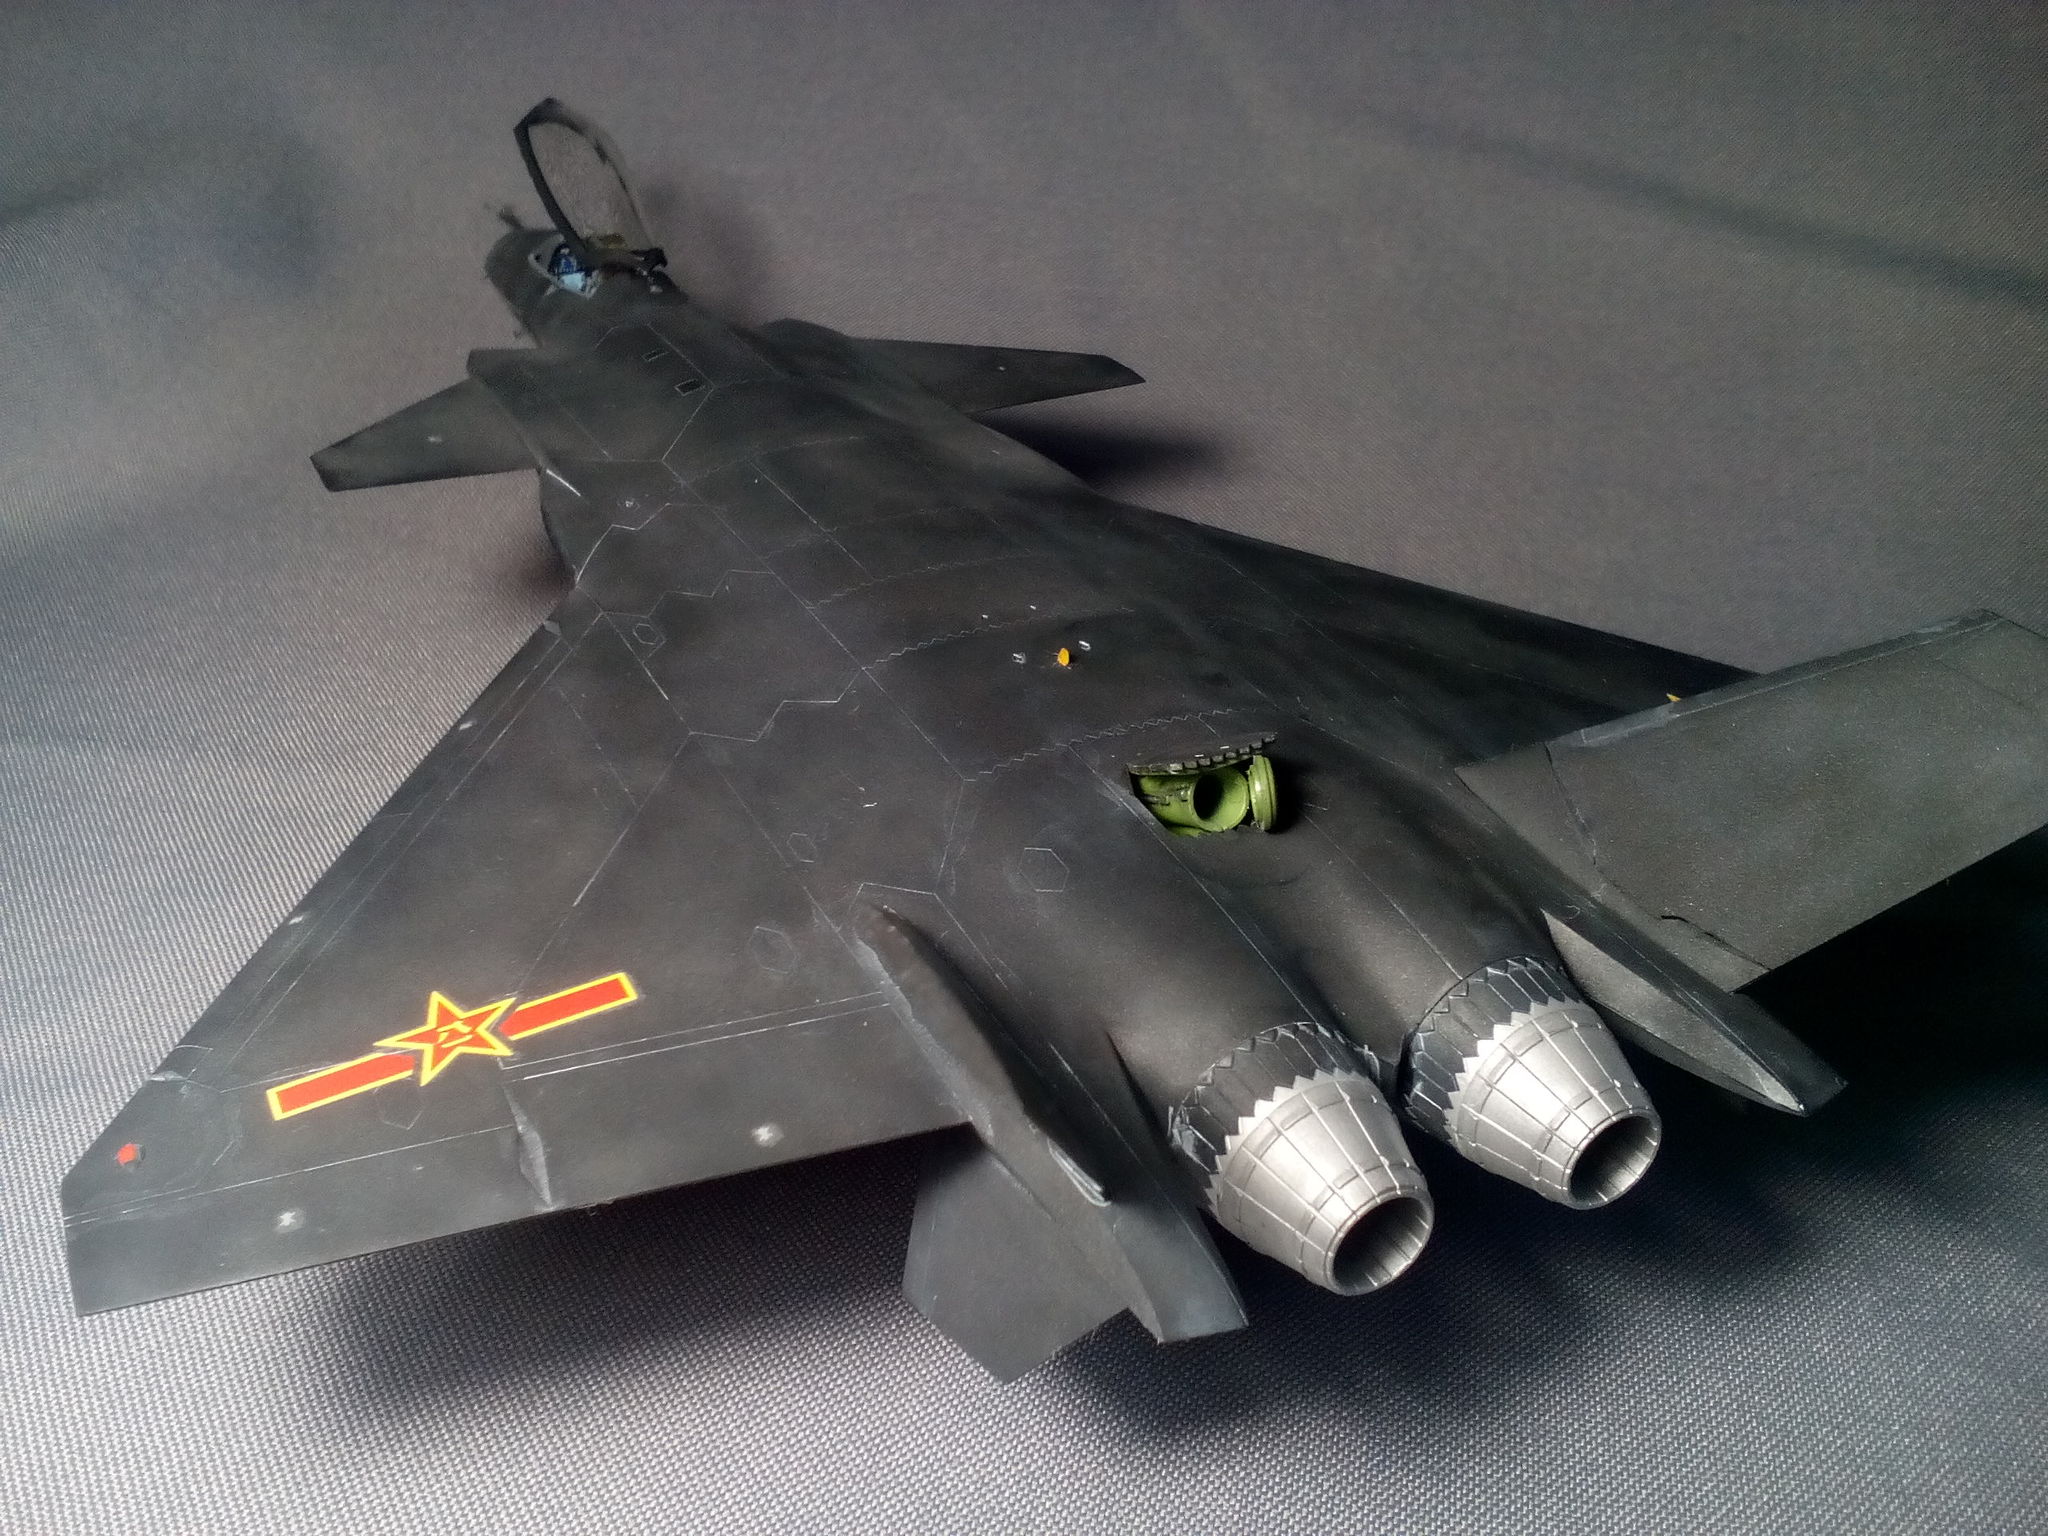 Dragon of Heaven. - My, Stand modeling, Prefabricated model, Aircraft modeling, Fighter, China, Fifth generation, Prototype, Longpost